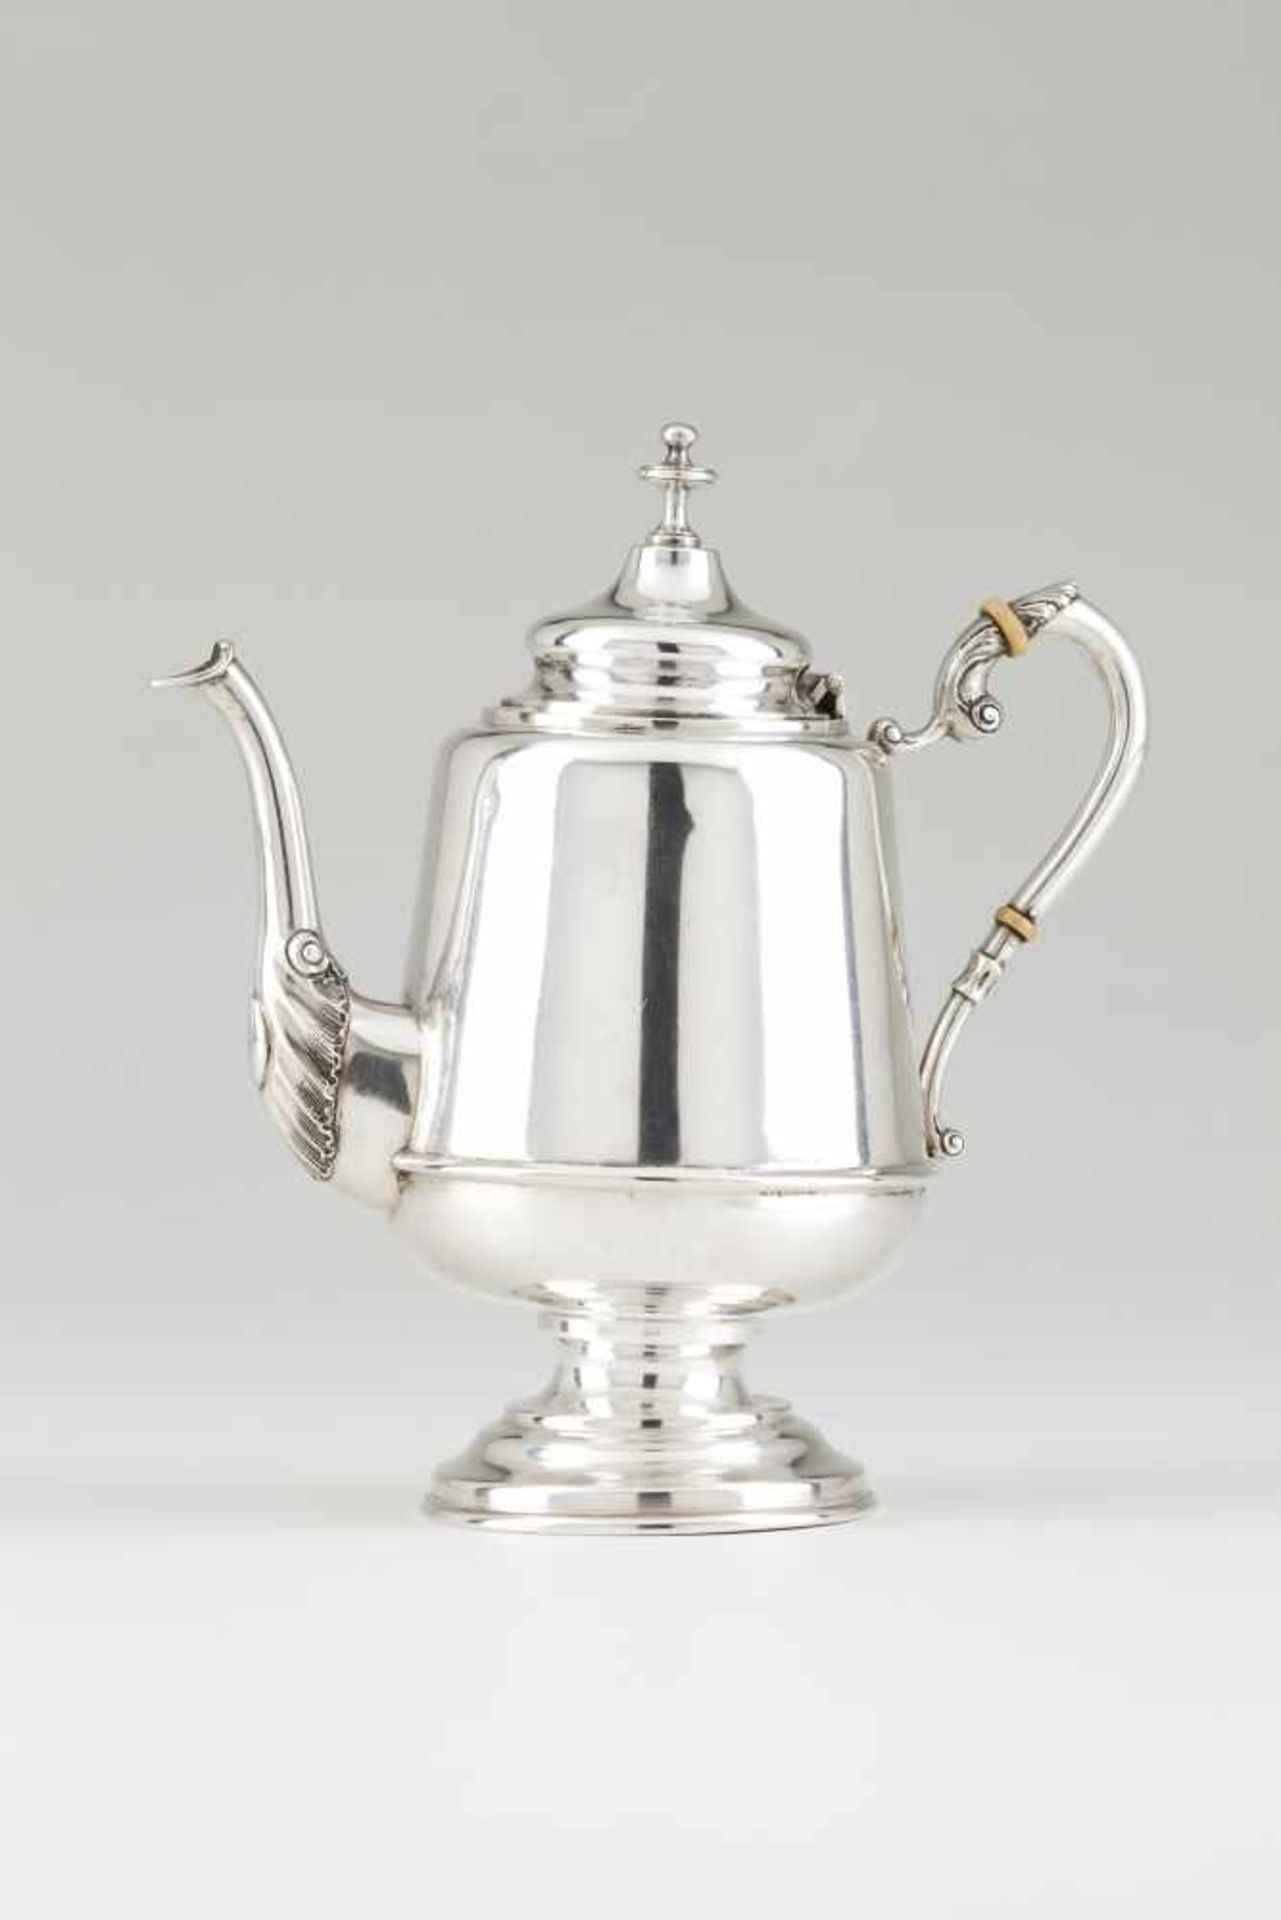 A coffee potPortuguese silverPlain turned body and spout of foliage motif at junctionVo